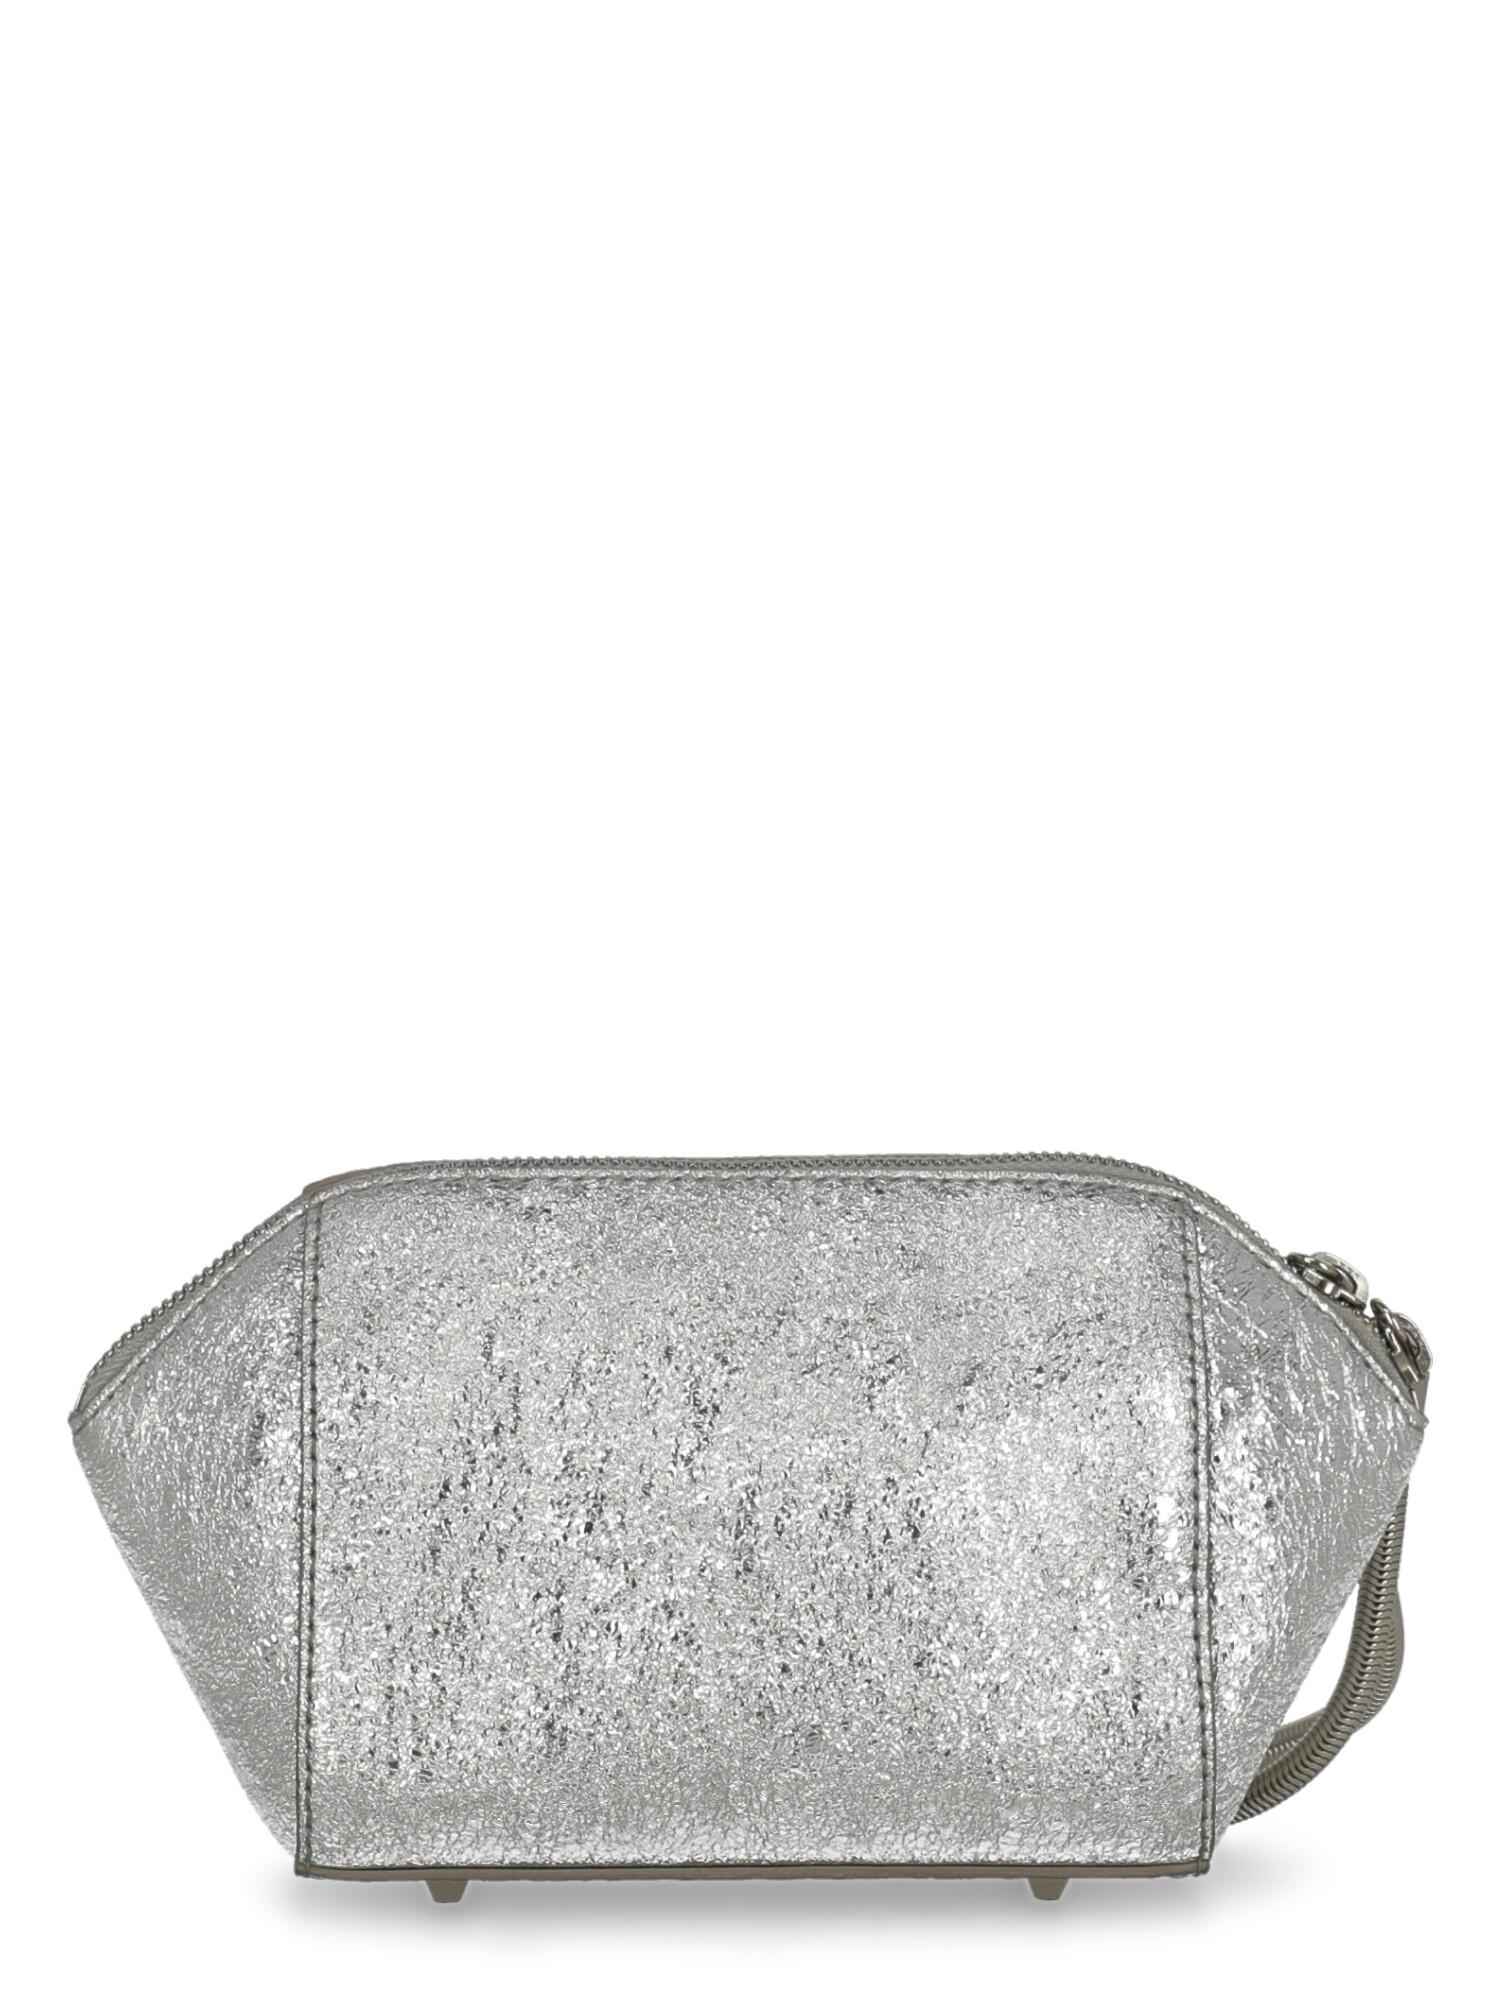 Alexander Wang  Women   Handbags   Silver Leather  In Good Condition For Sale In Milan, IT